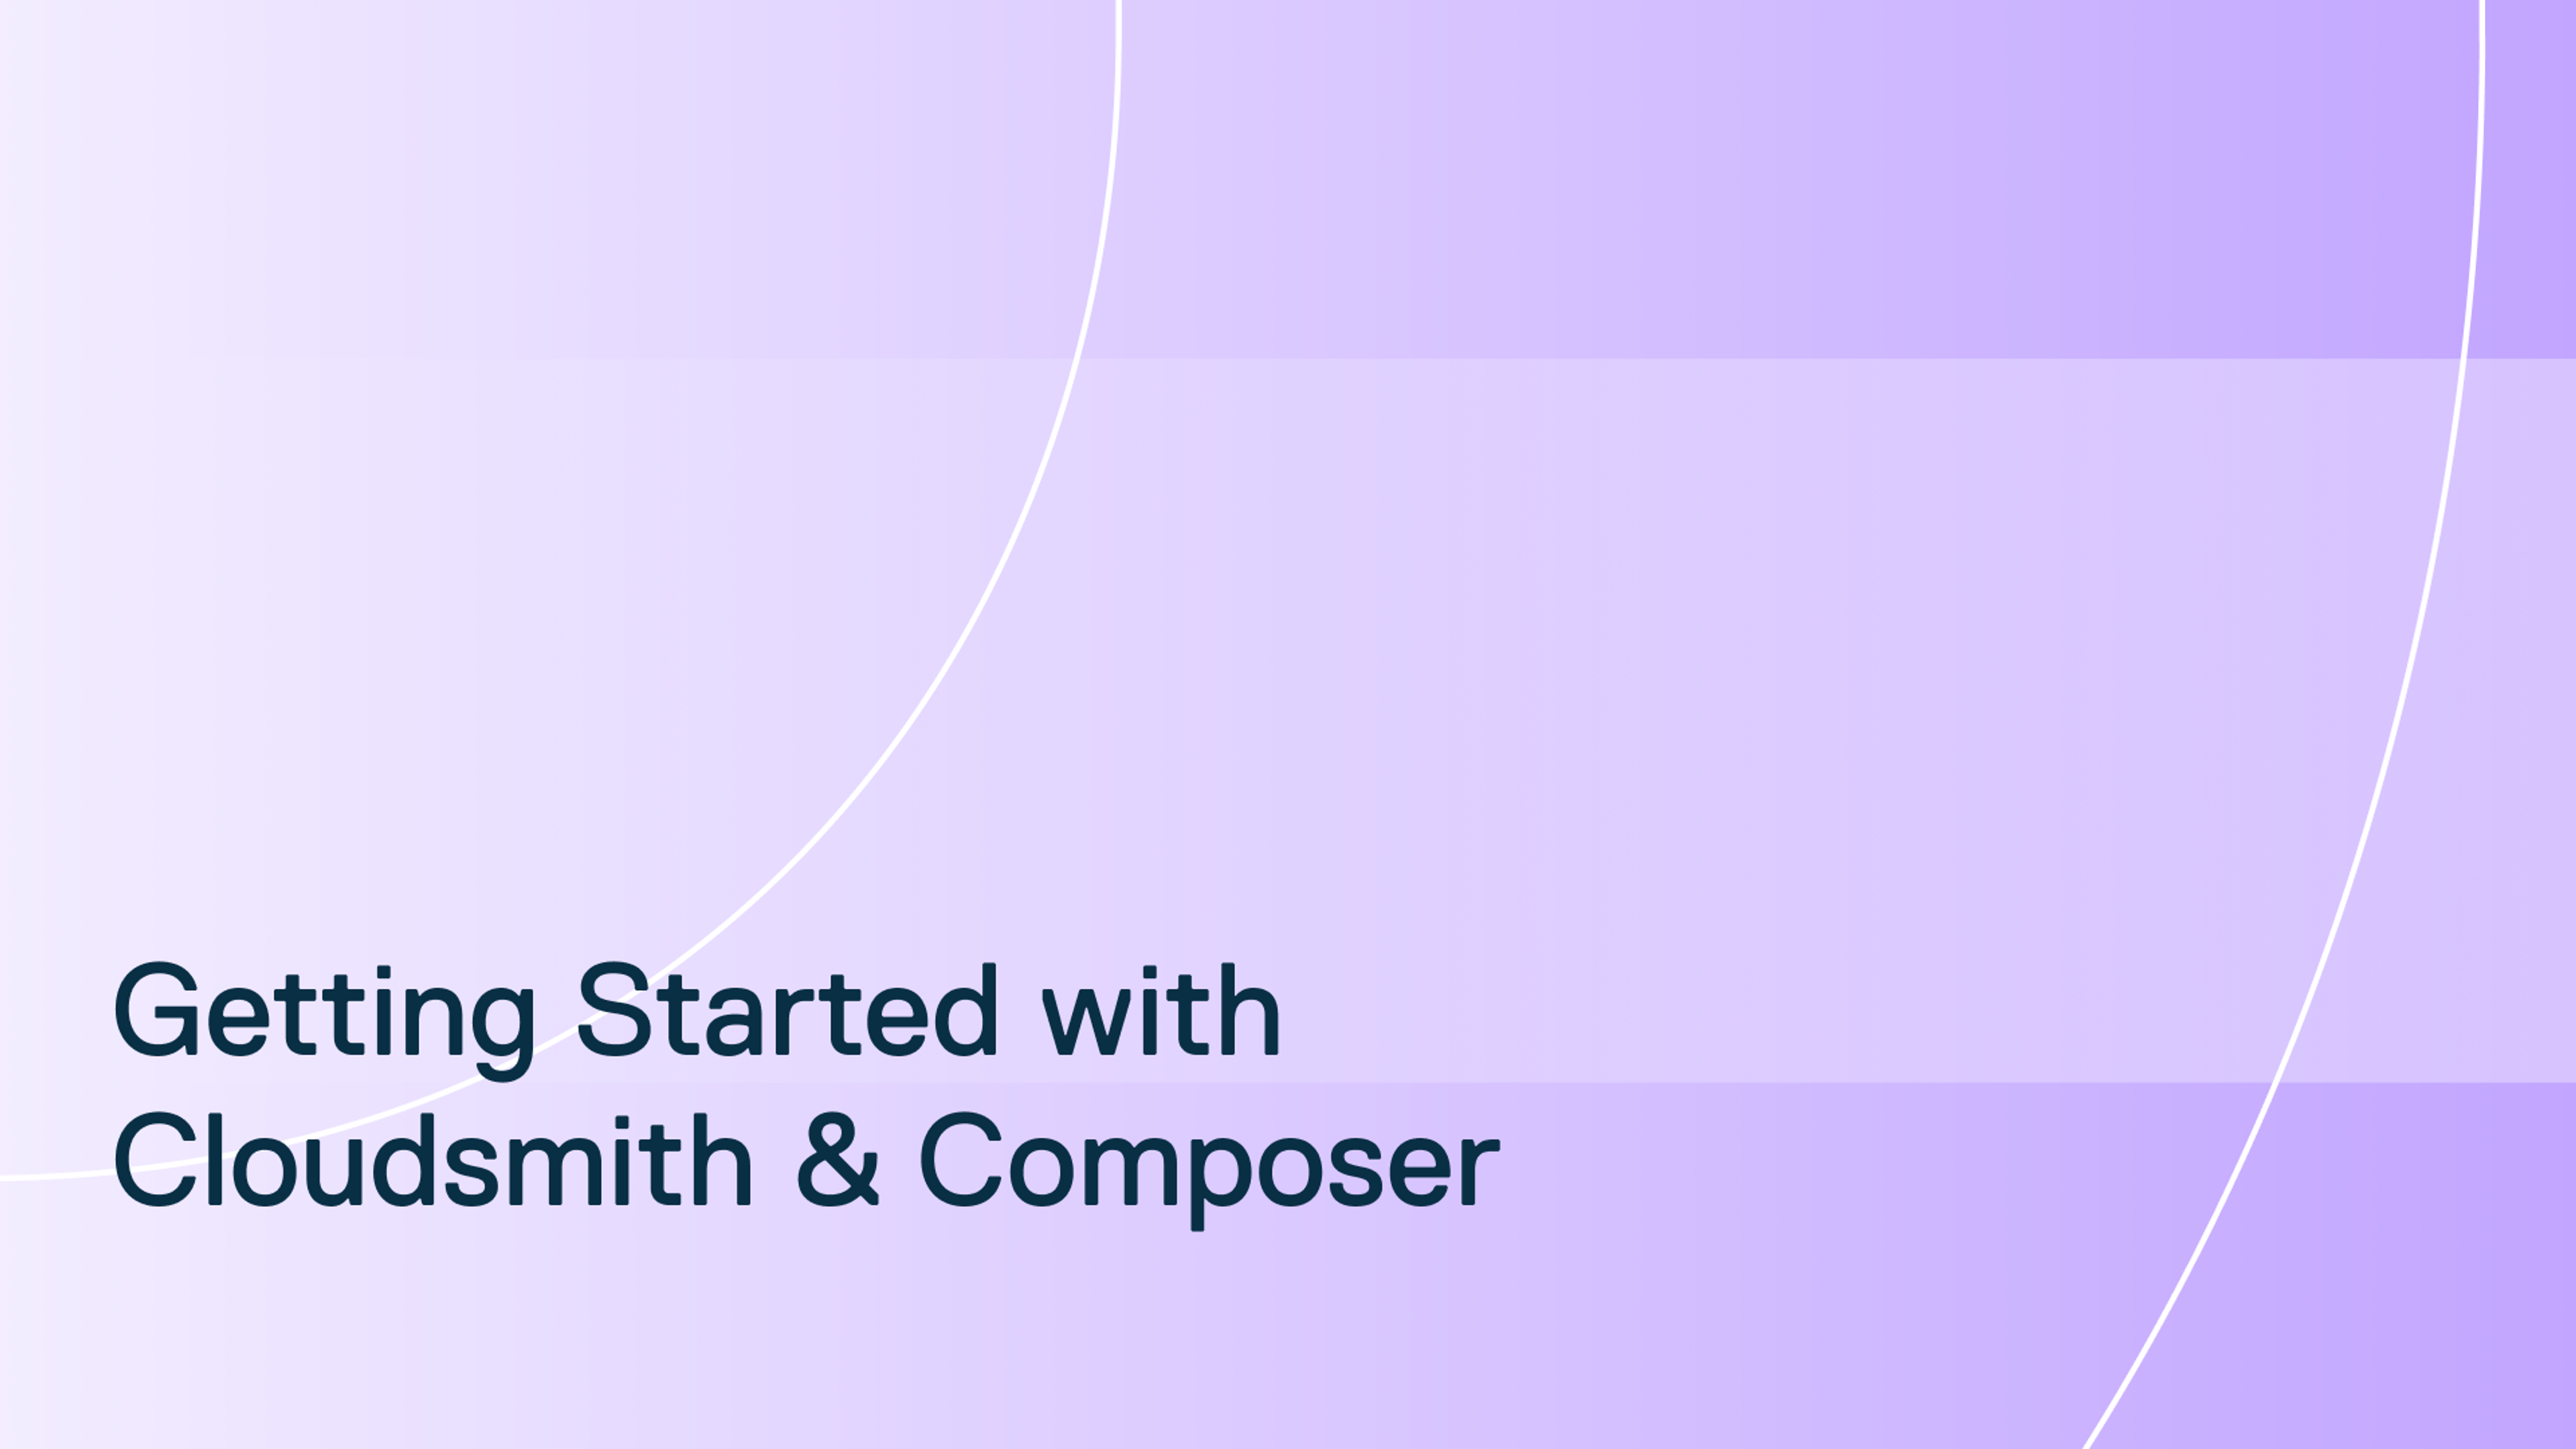 Using Cloudsmith with Composer